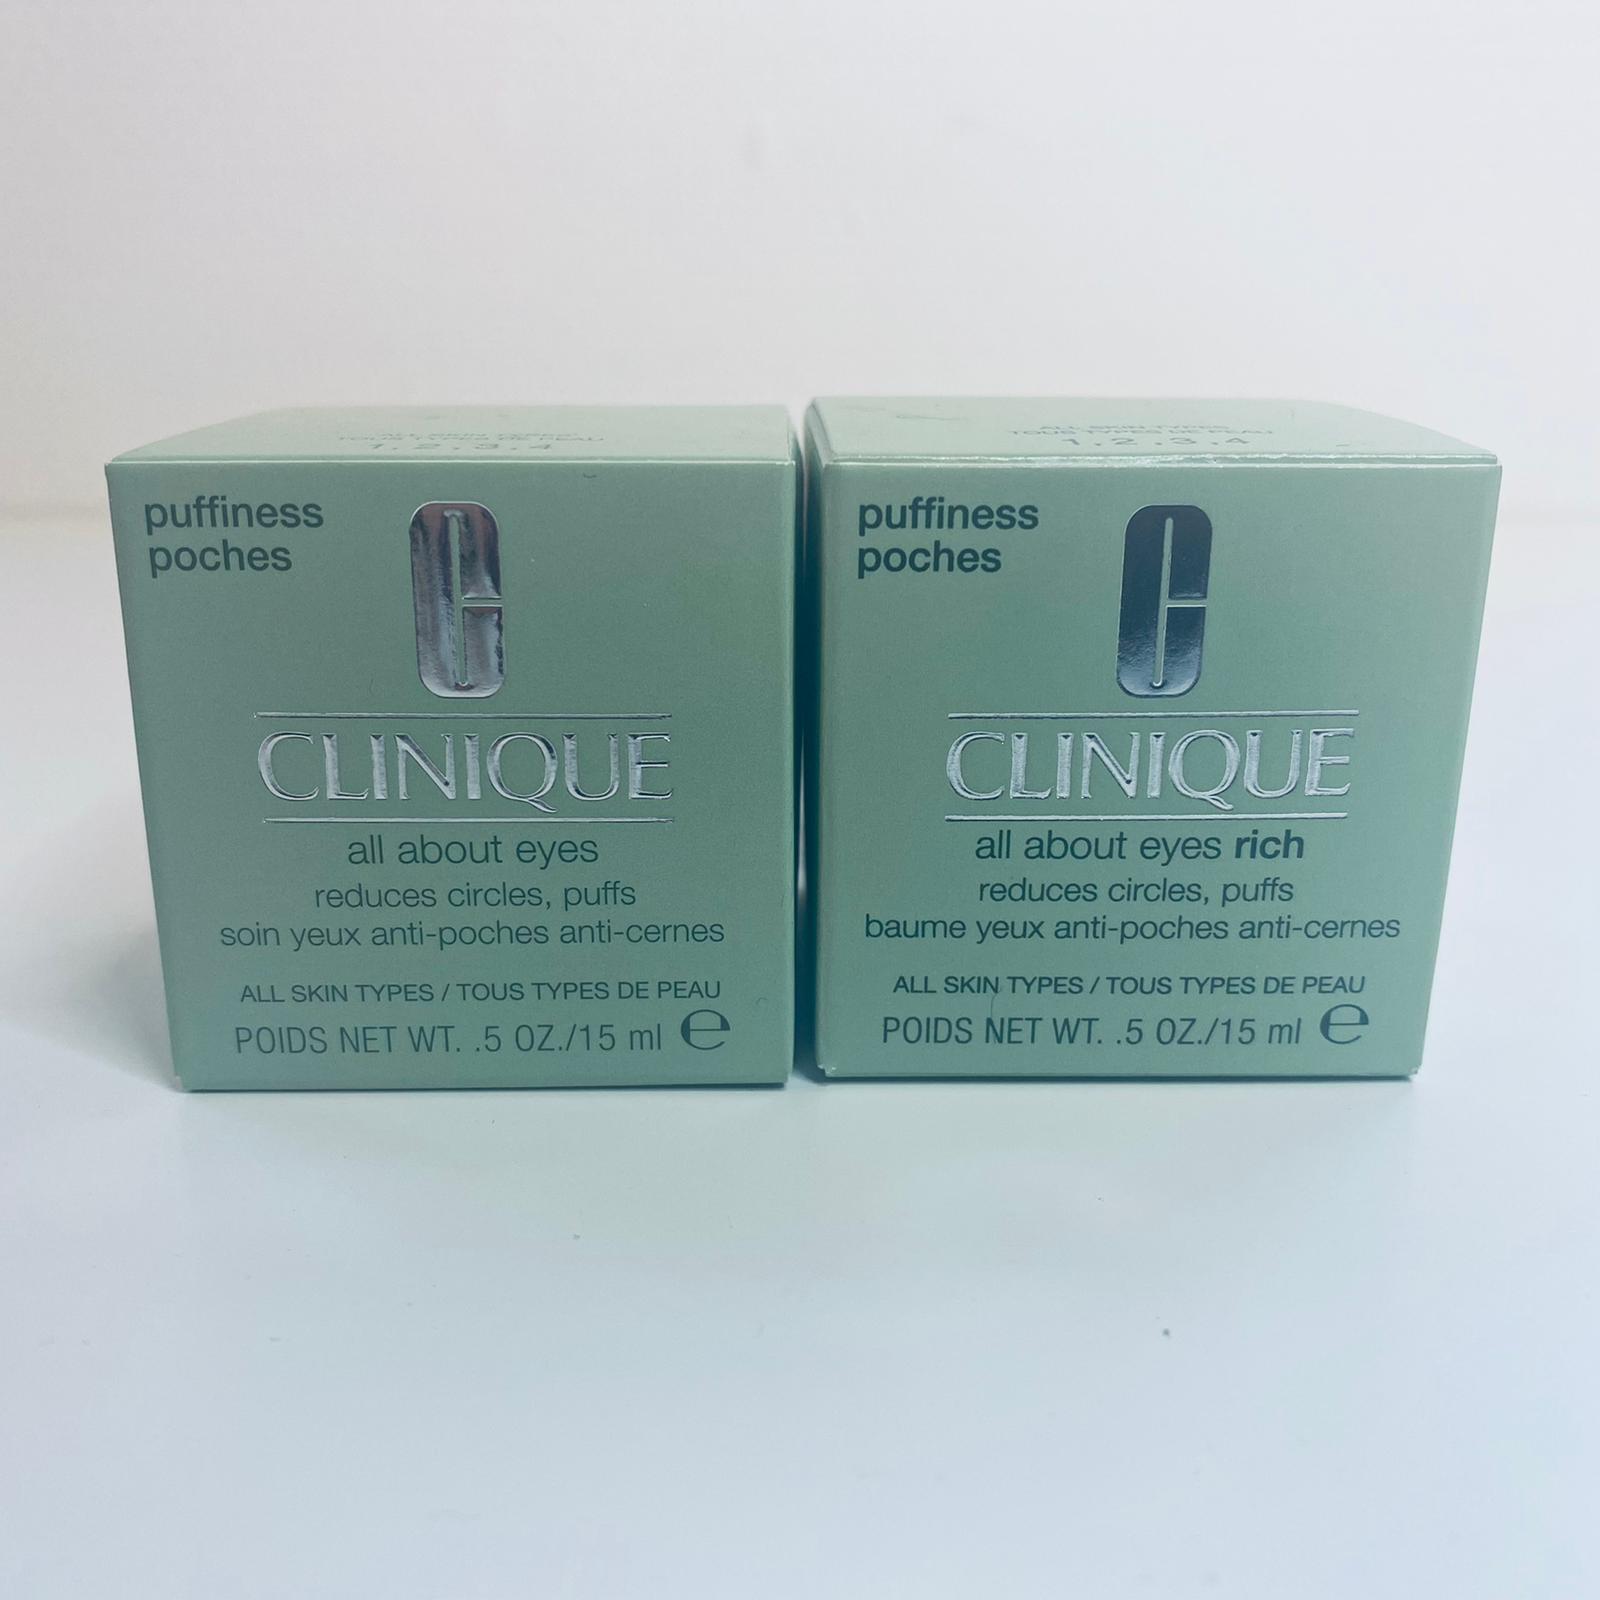 Clinique all about eyes reduces circles and puffs. all skin types 15 ml